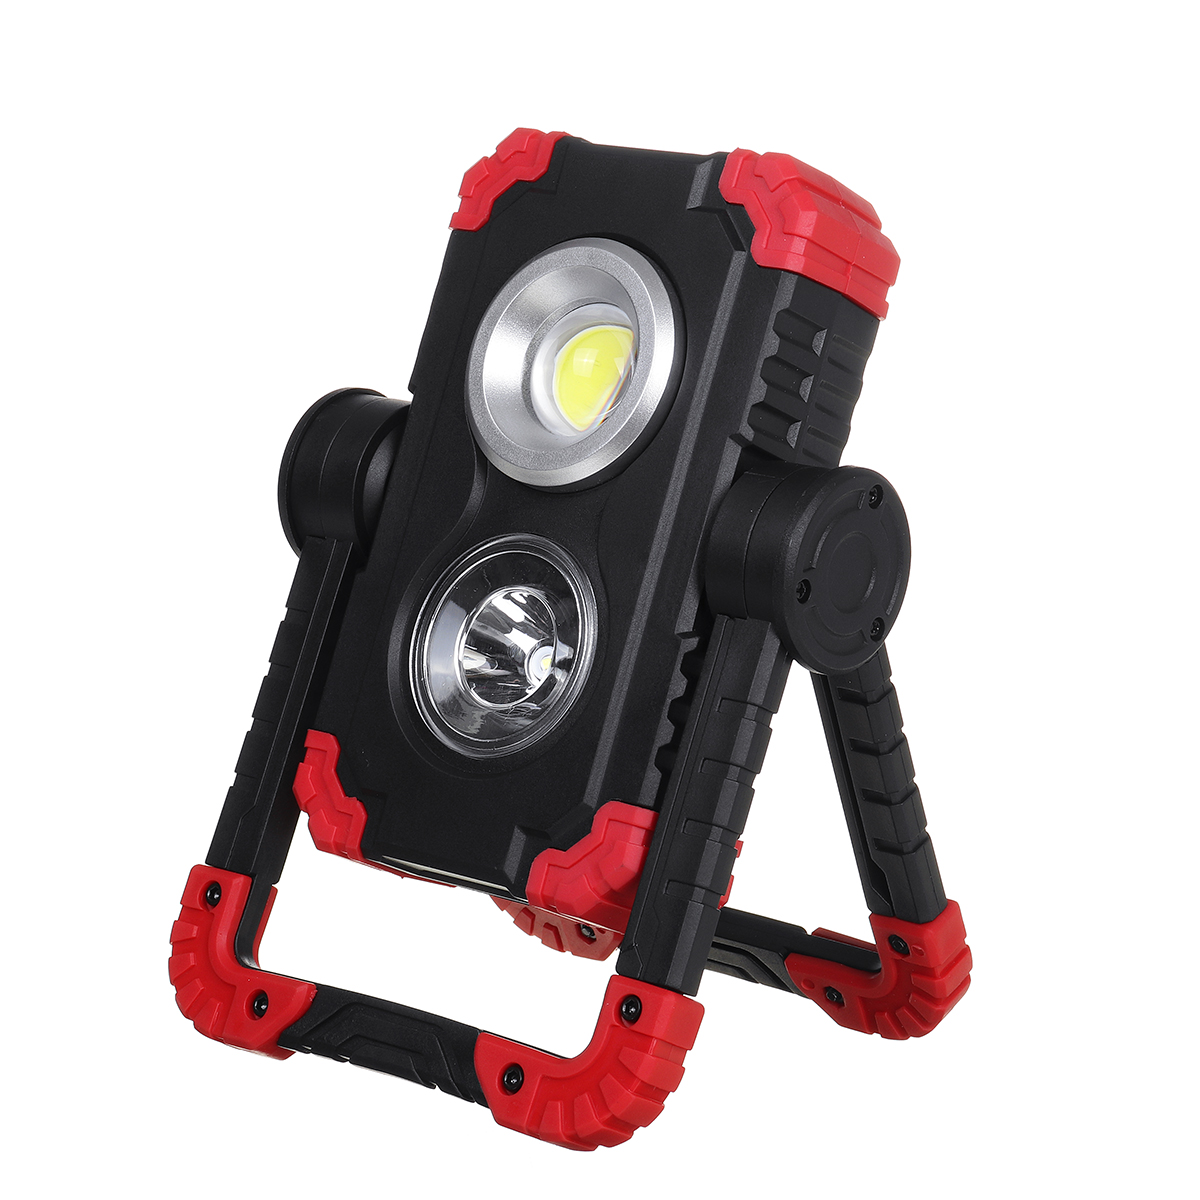 Find COB LED Work Light Camping Emergency Inspection Flashlight Spot Flood Lamp Stand for Sale on Gipsybee.com with cryptocurrencies